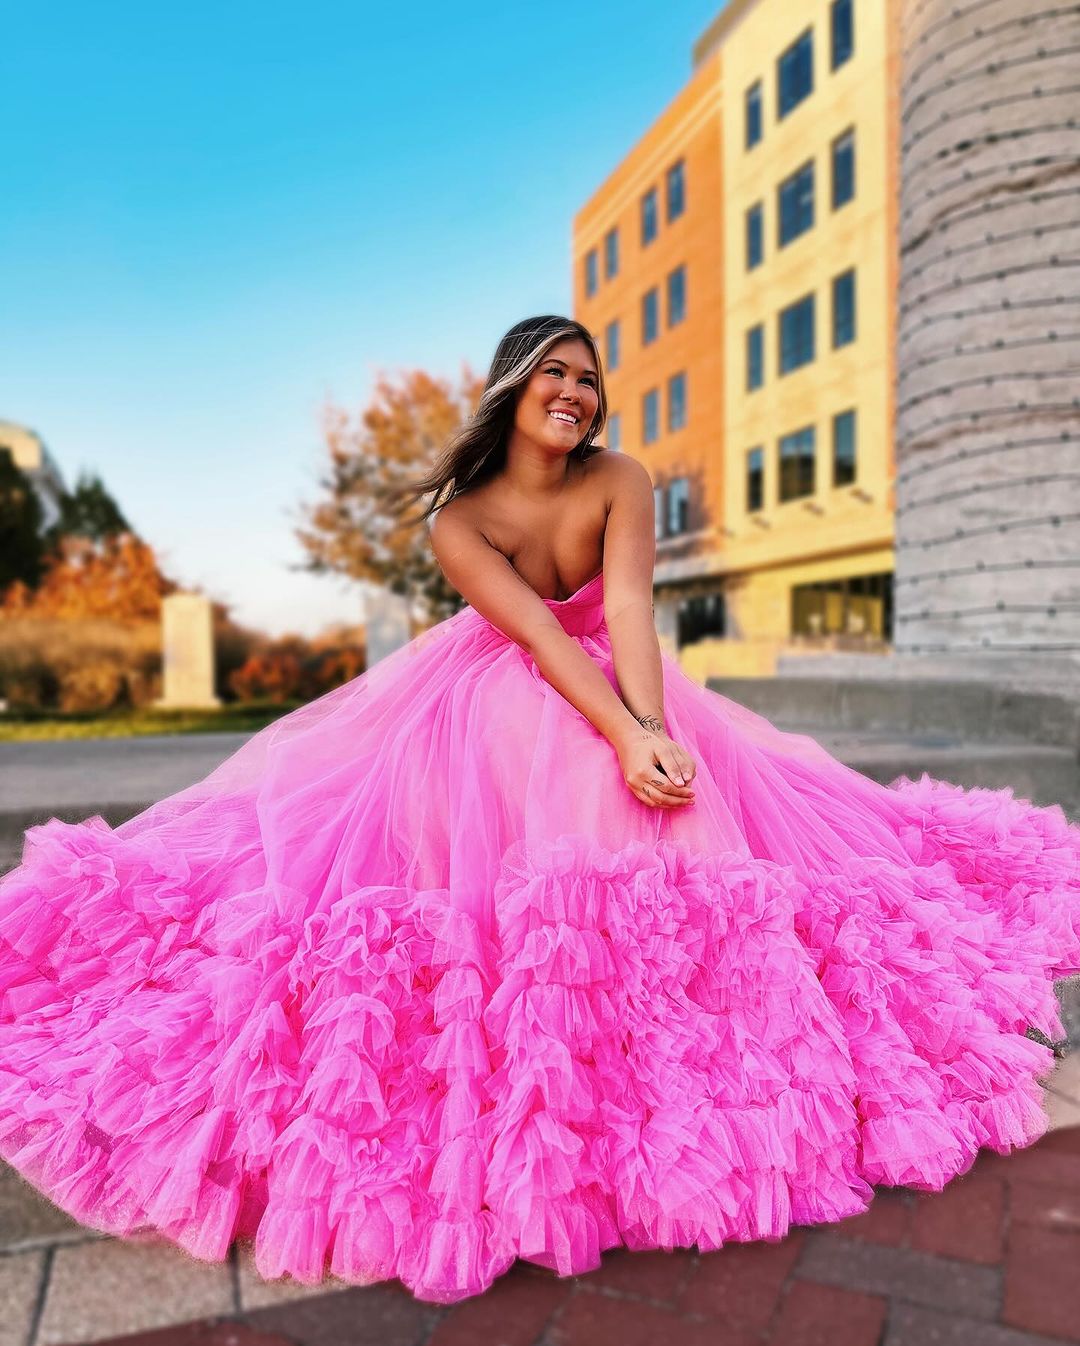 Dressime A Line Strapless Tulle Ruffle Long Prom Dress